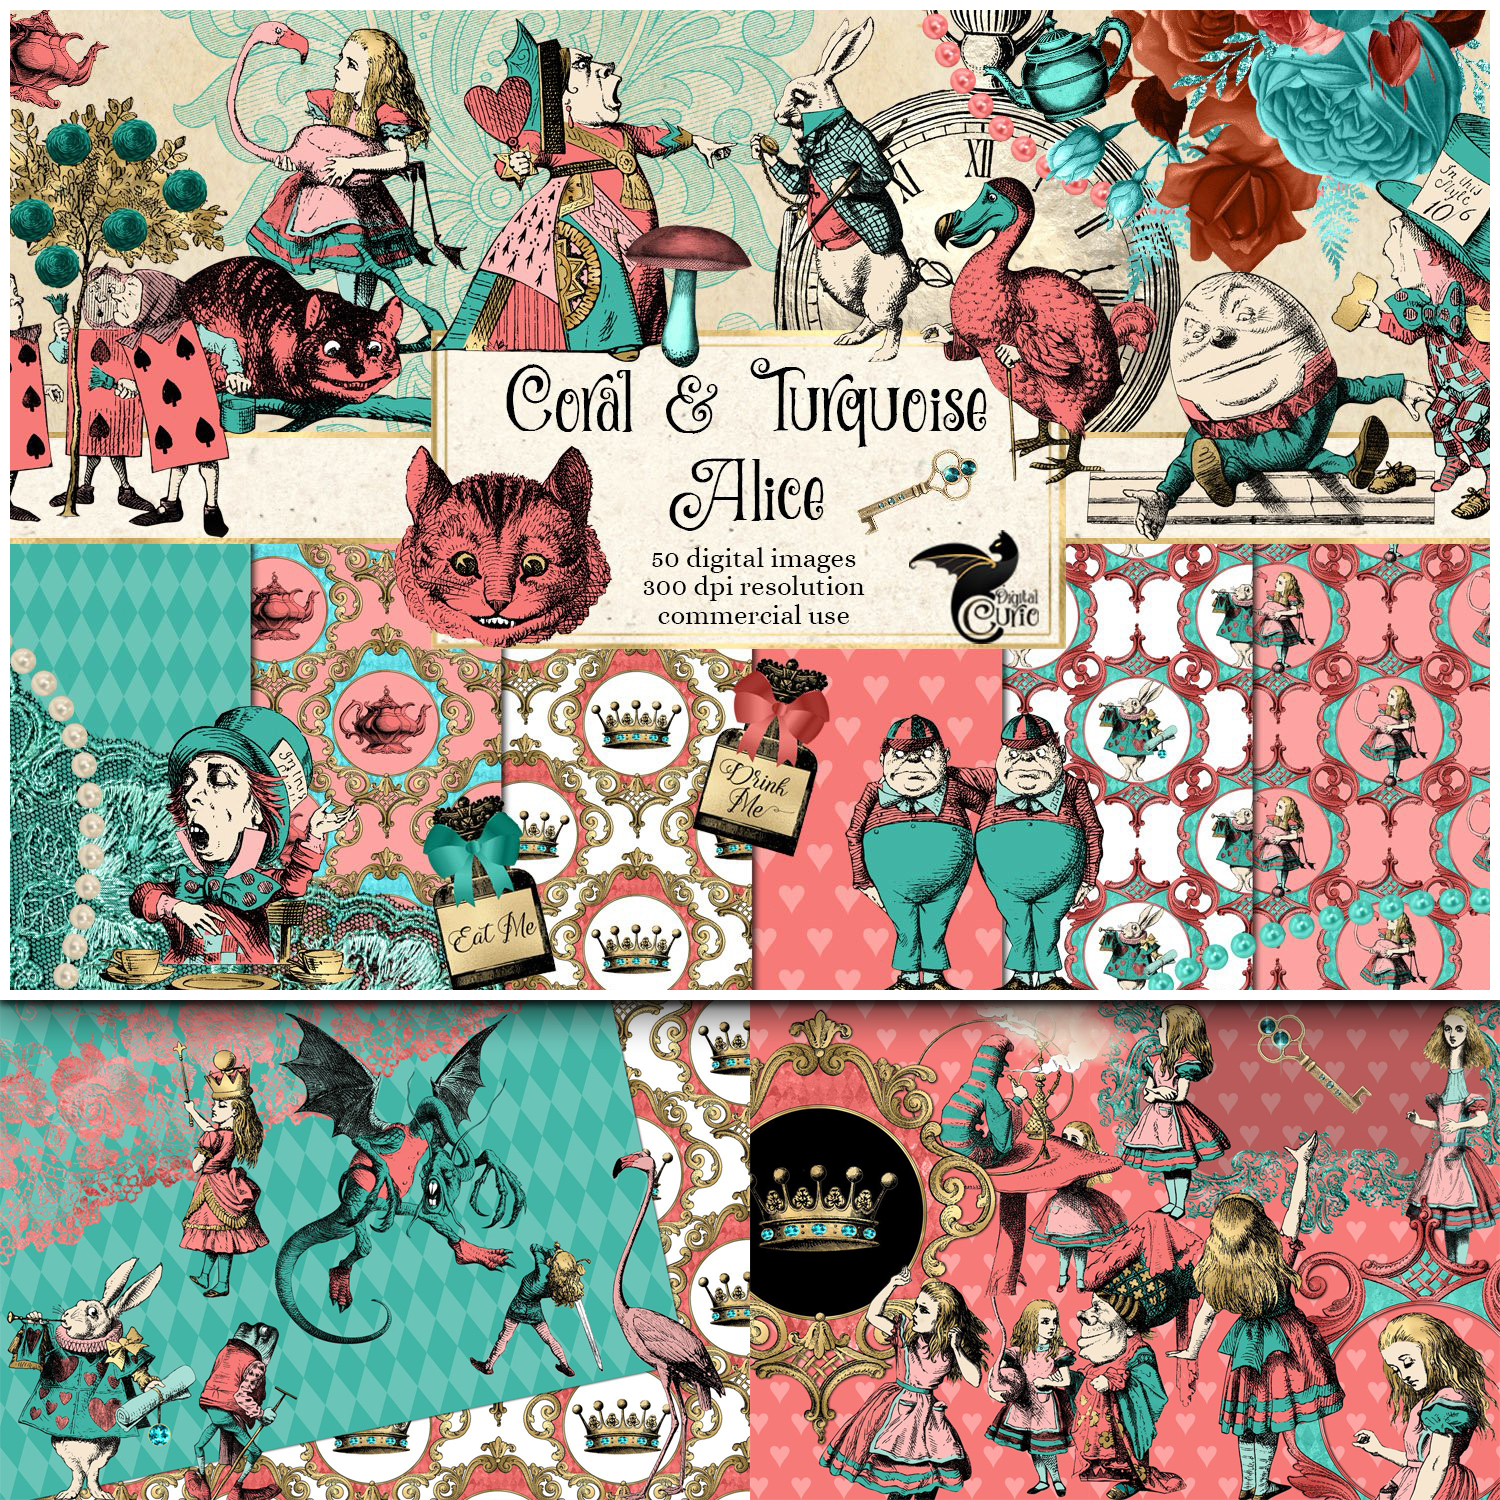 Prints of coral and turquoise alice in wonderland graphics.